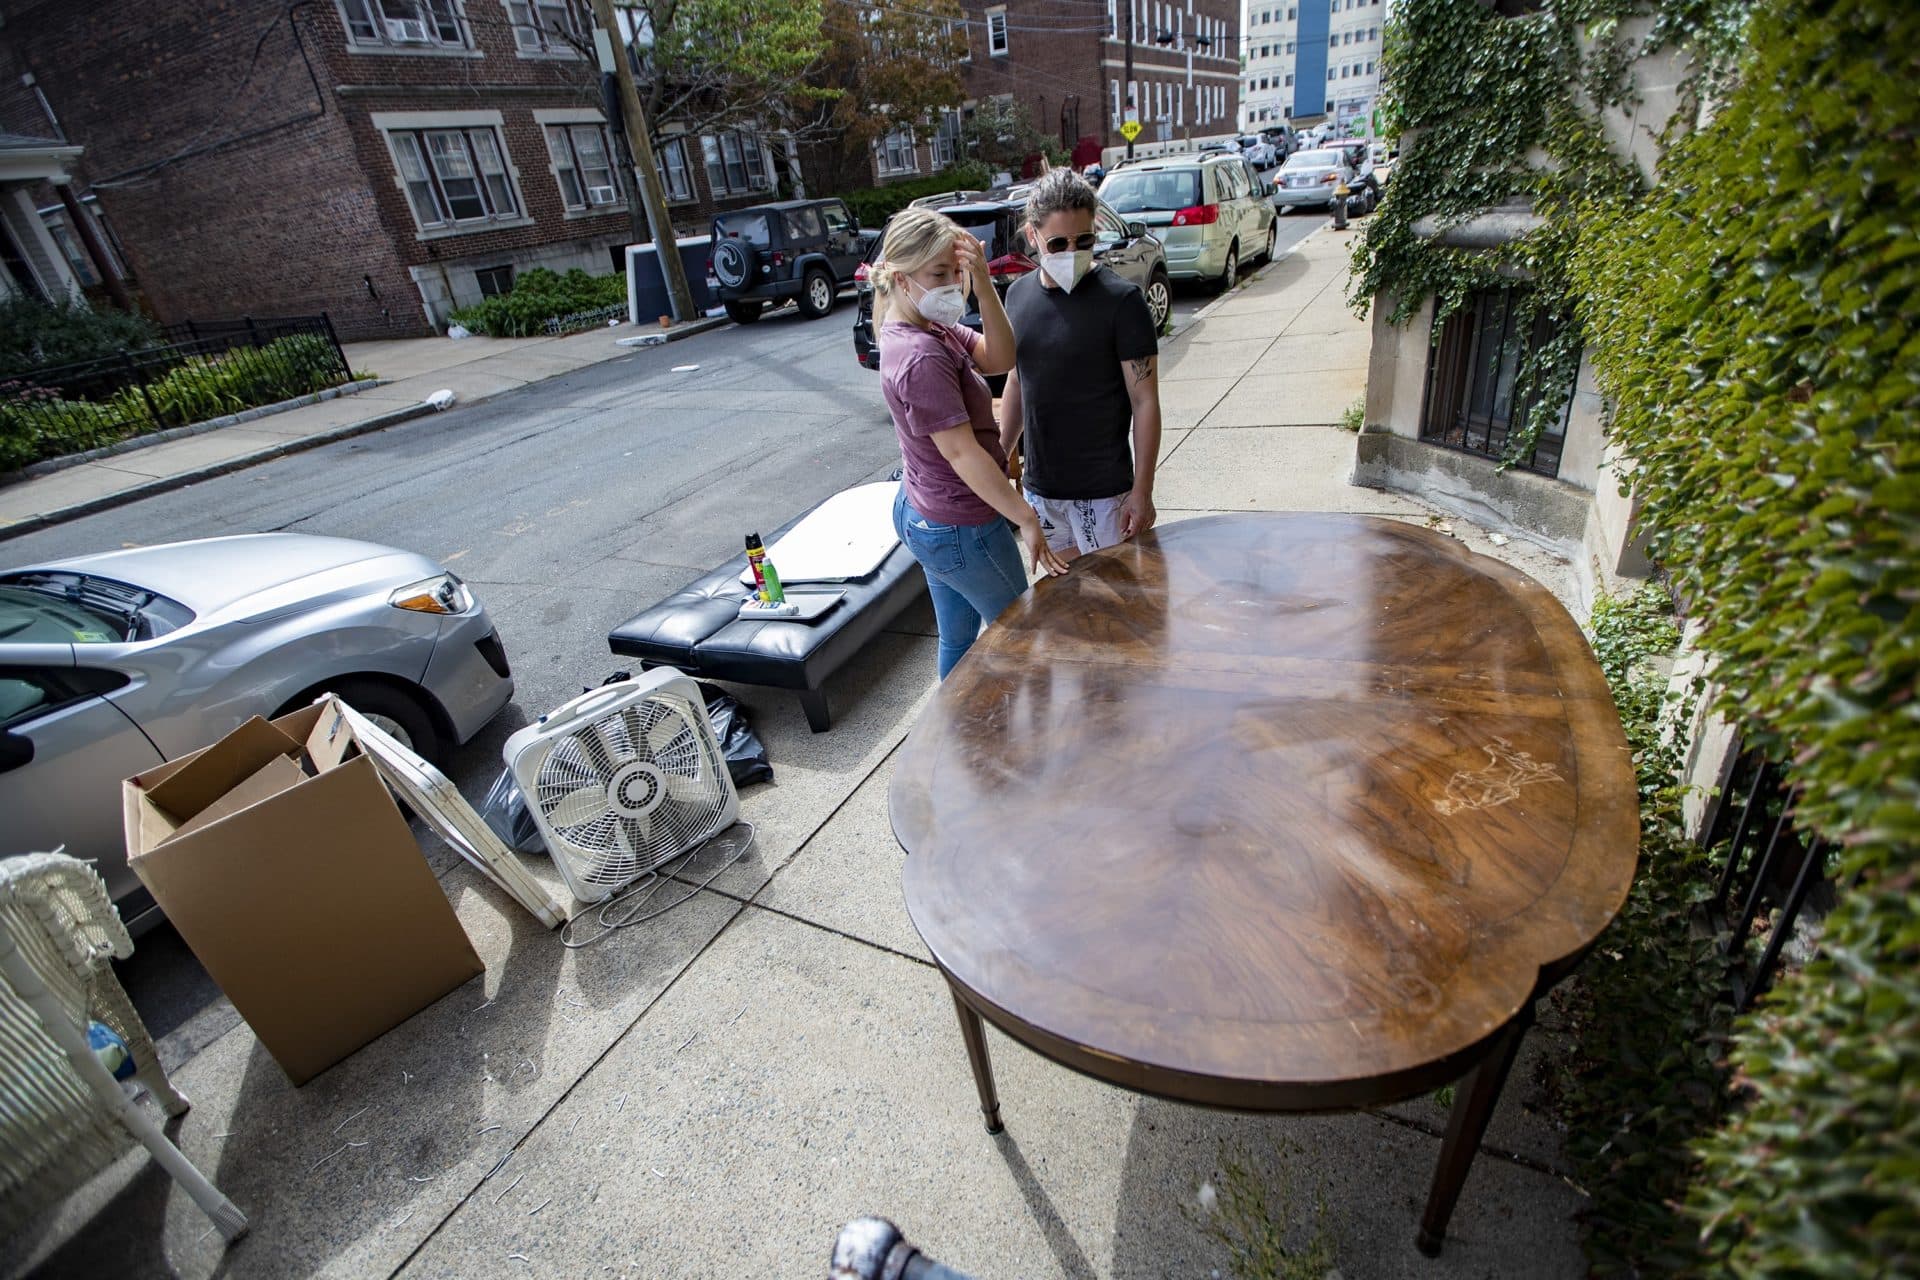 Treasure hunters and Berklee students Mina Nystead, left, and Ciaran De Chud scope out a table left out on Reedsdale Street. (Jesse Costa/WBUR)